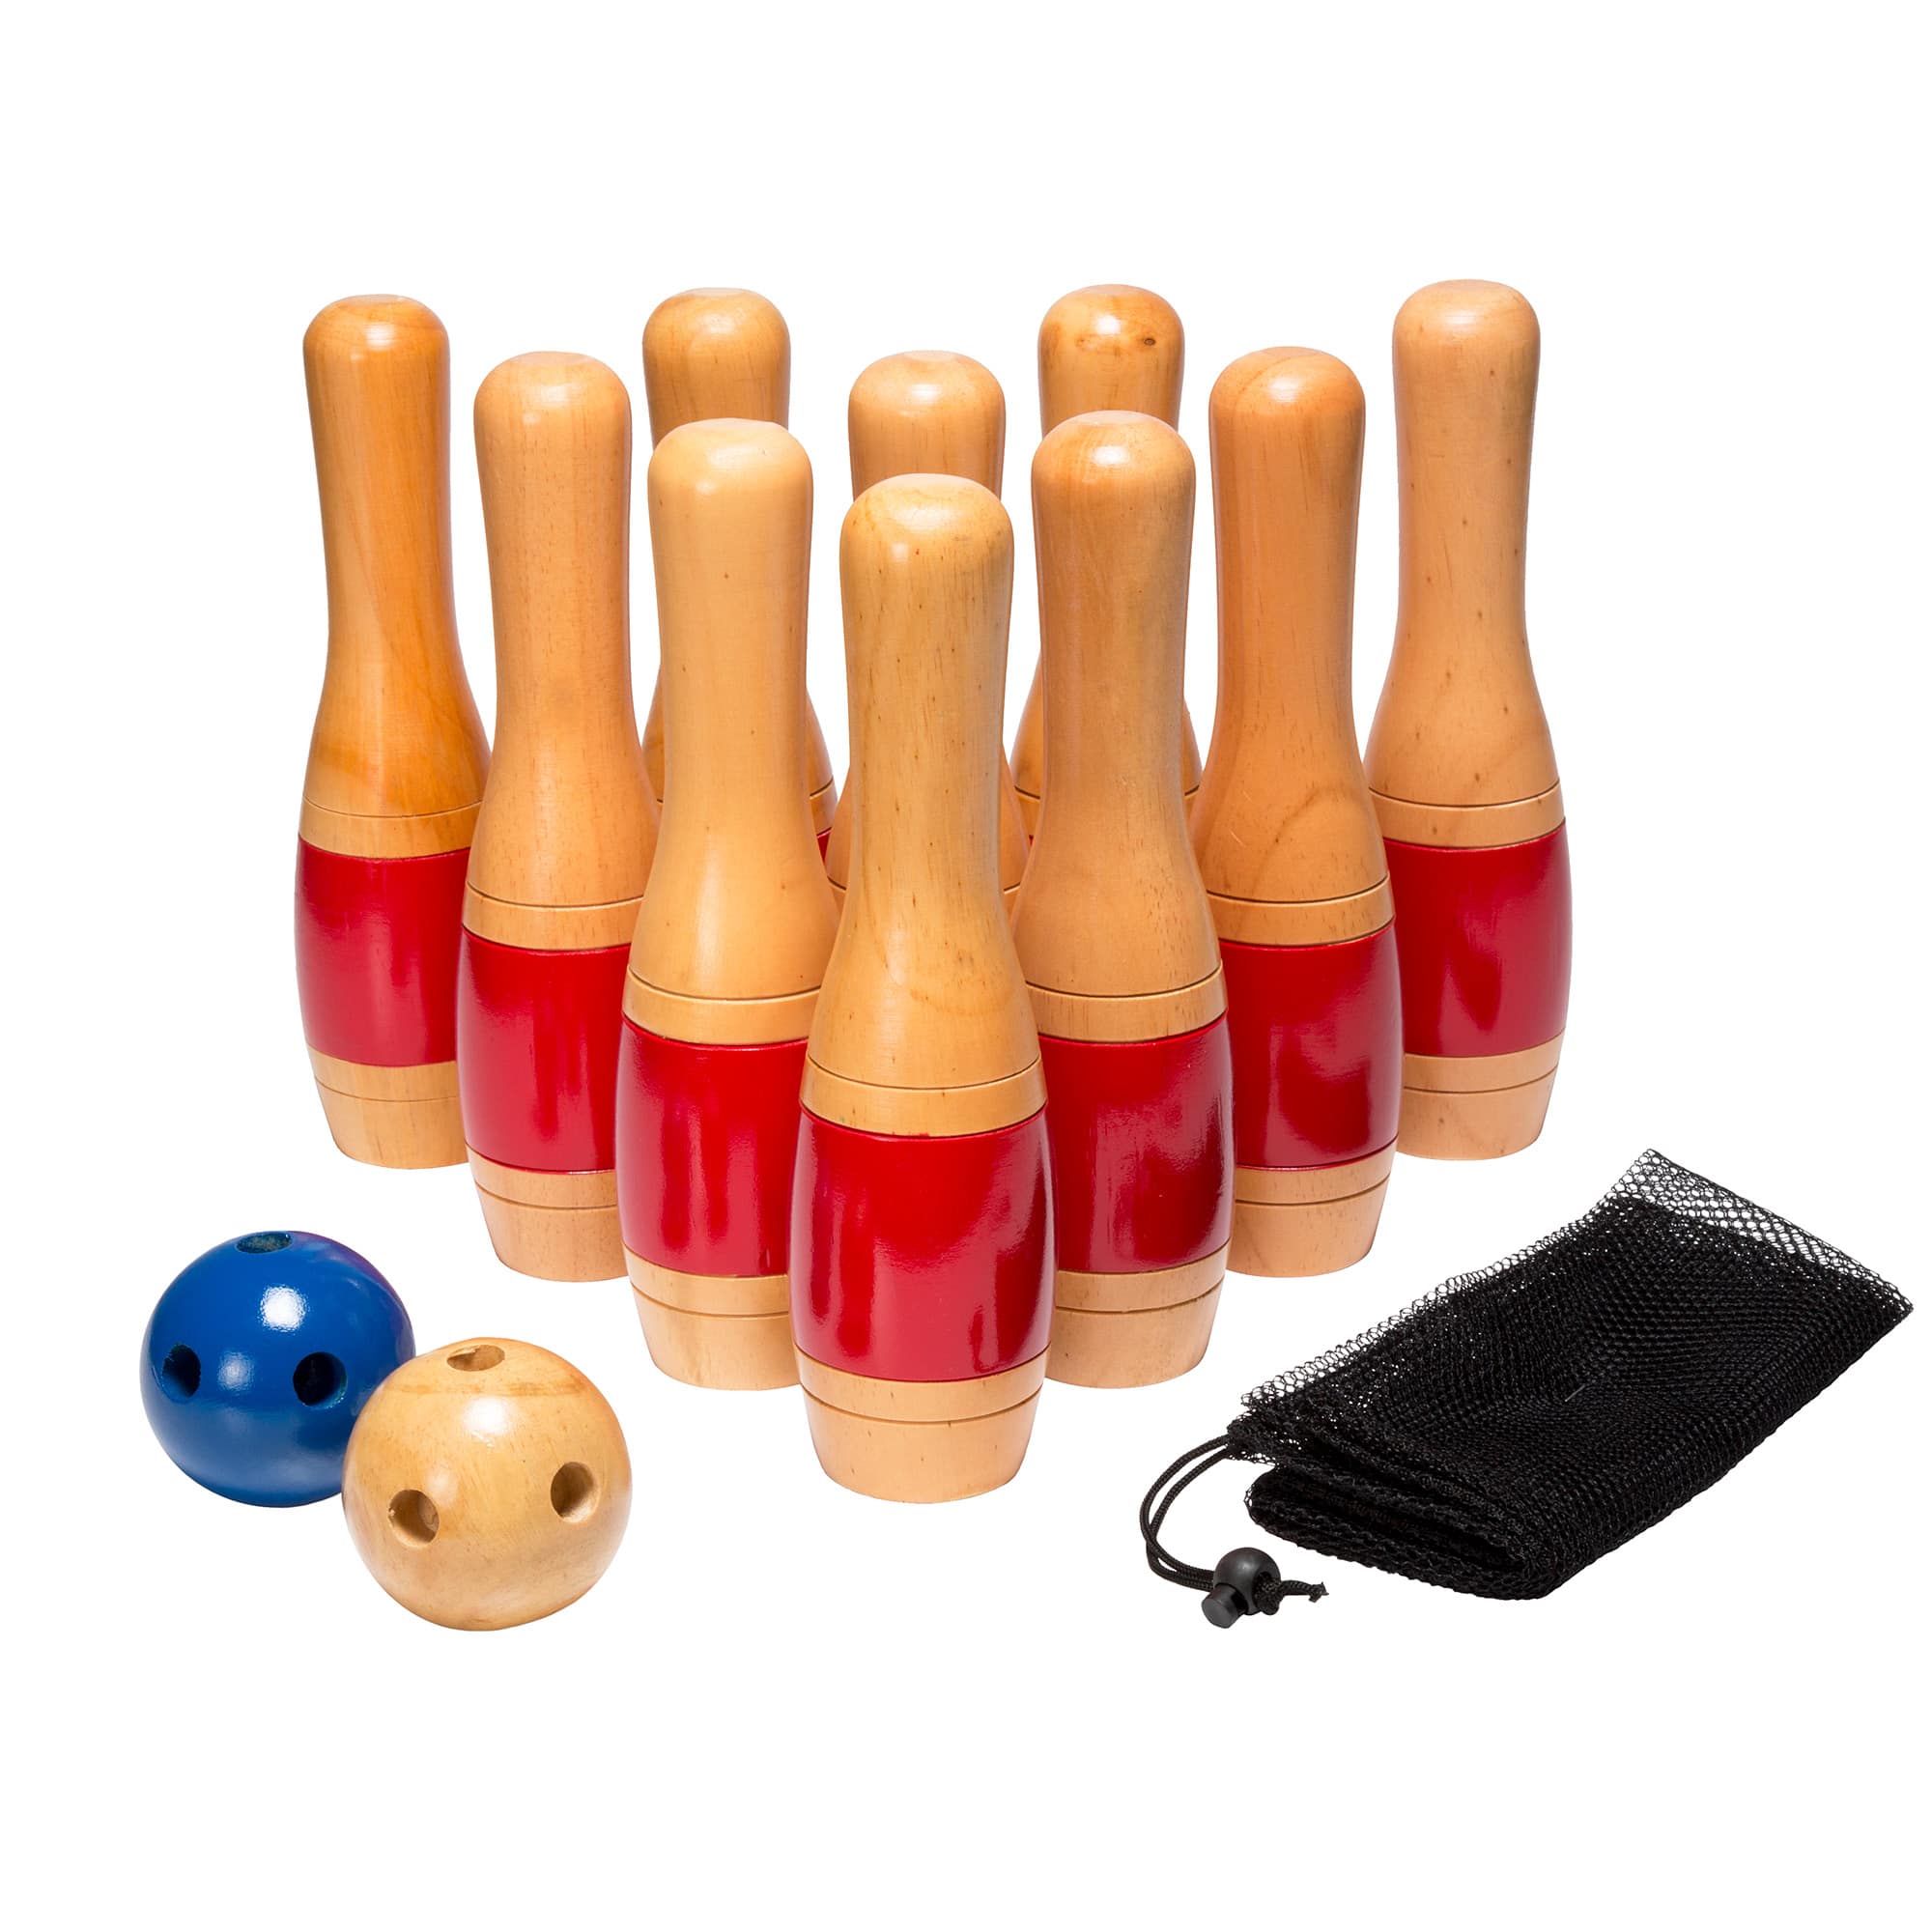 8 Inch Wooden Lawn Bowling Game Set Indoor Outdoor Kids Adults Fun 